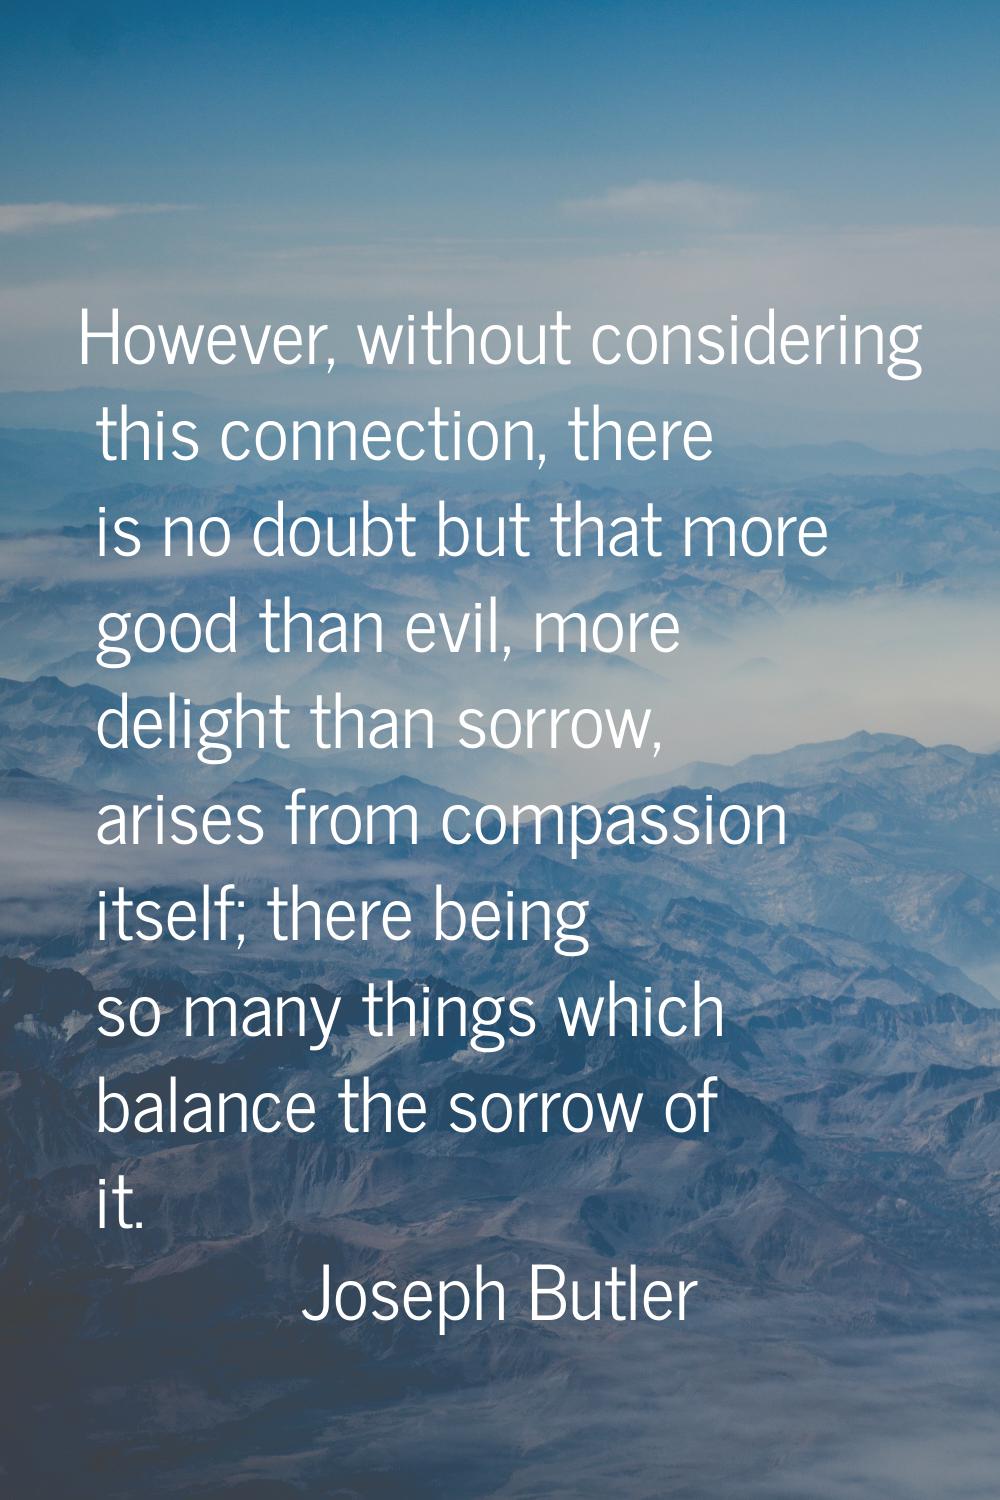 However, without considering this connection, there is no doubt but that more good than evil, more 